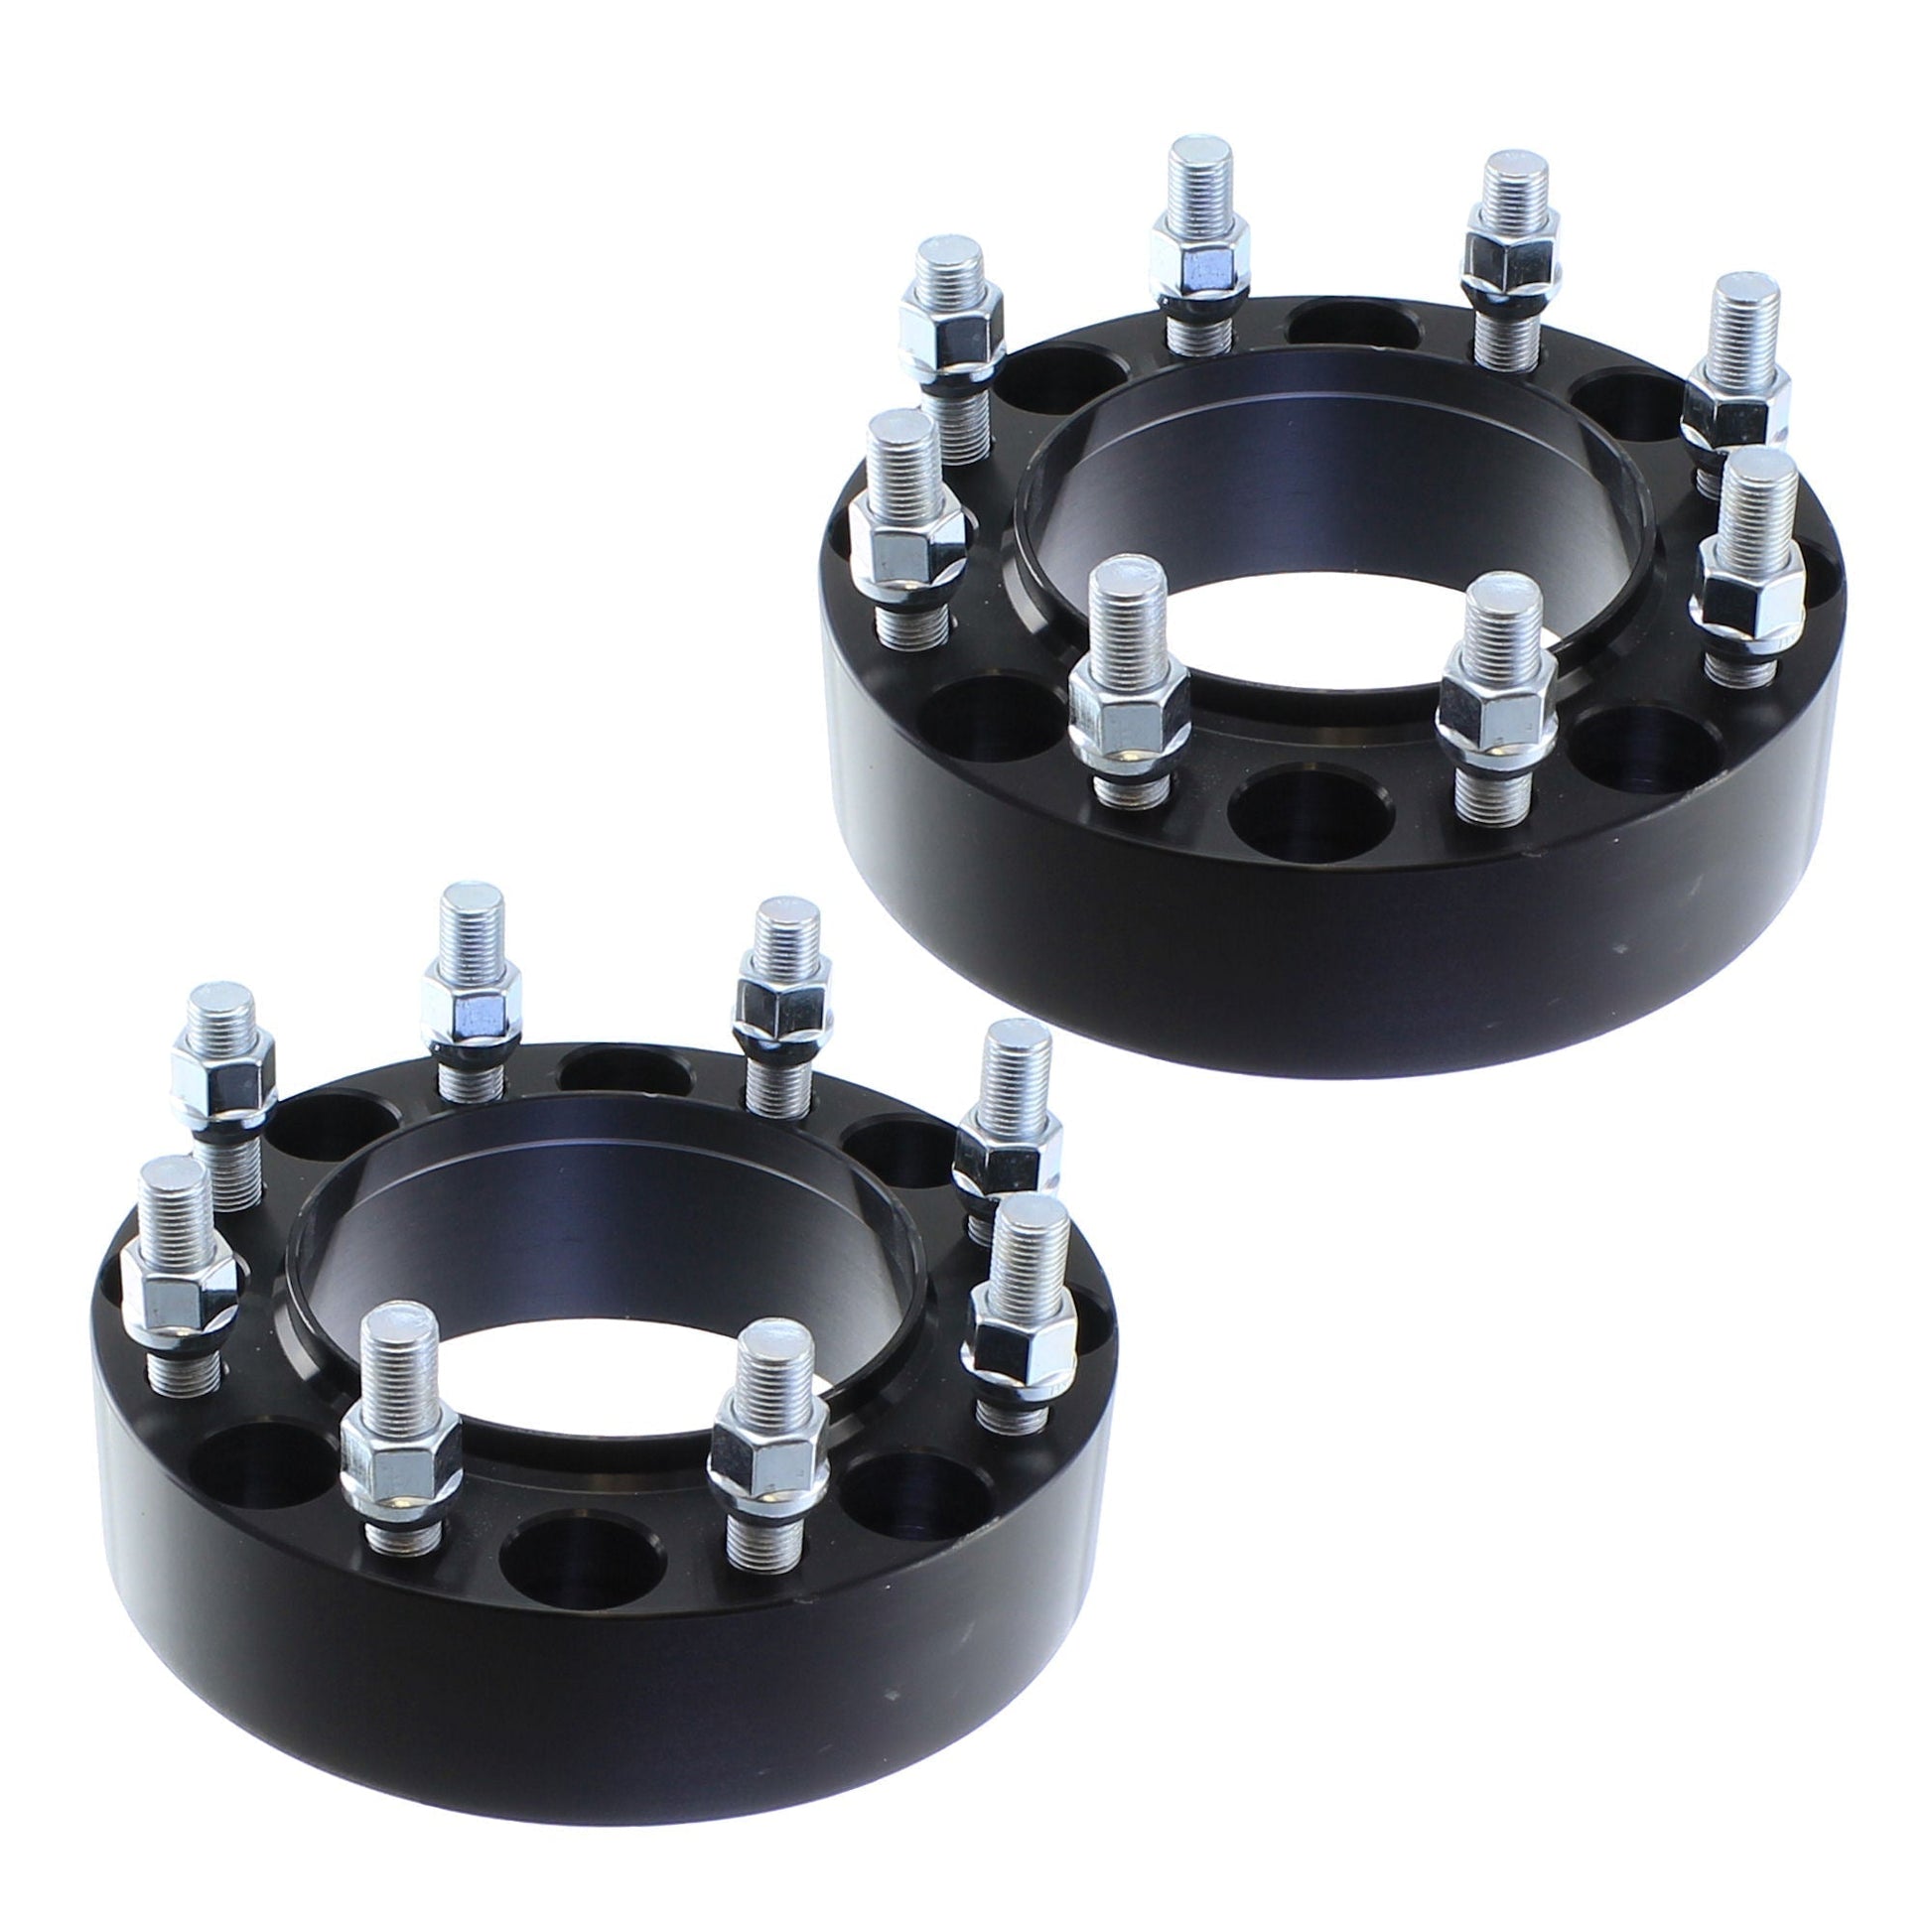 1.5" (38mm) Titan Wheel Spacers for Nissan NV Ram 2500 3500 | 8x6.5 | 121.3 Hubcentric |14x1.5 Studs |  Set of 4 | Titan Wheel Accessories